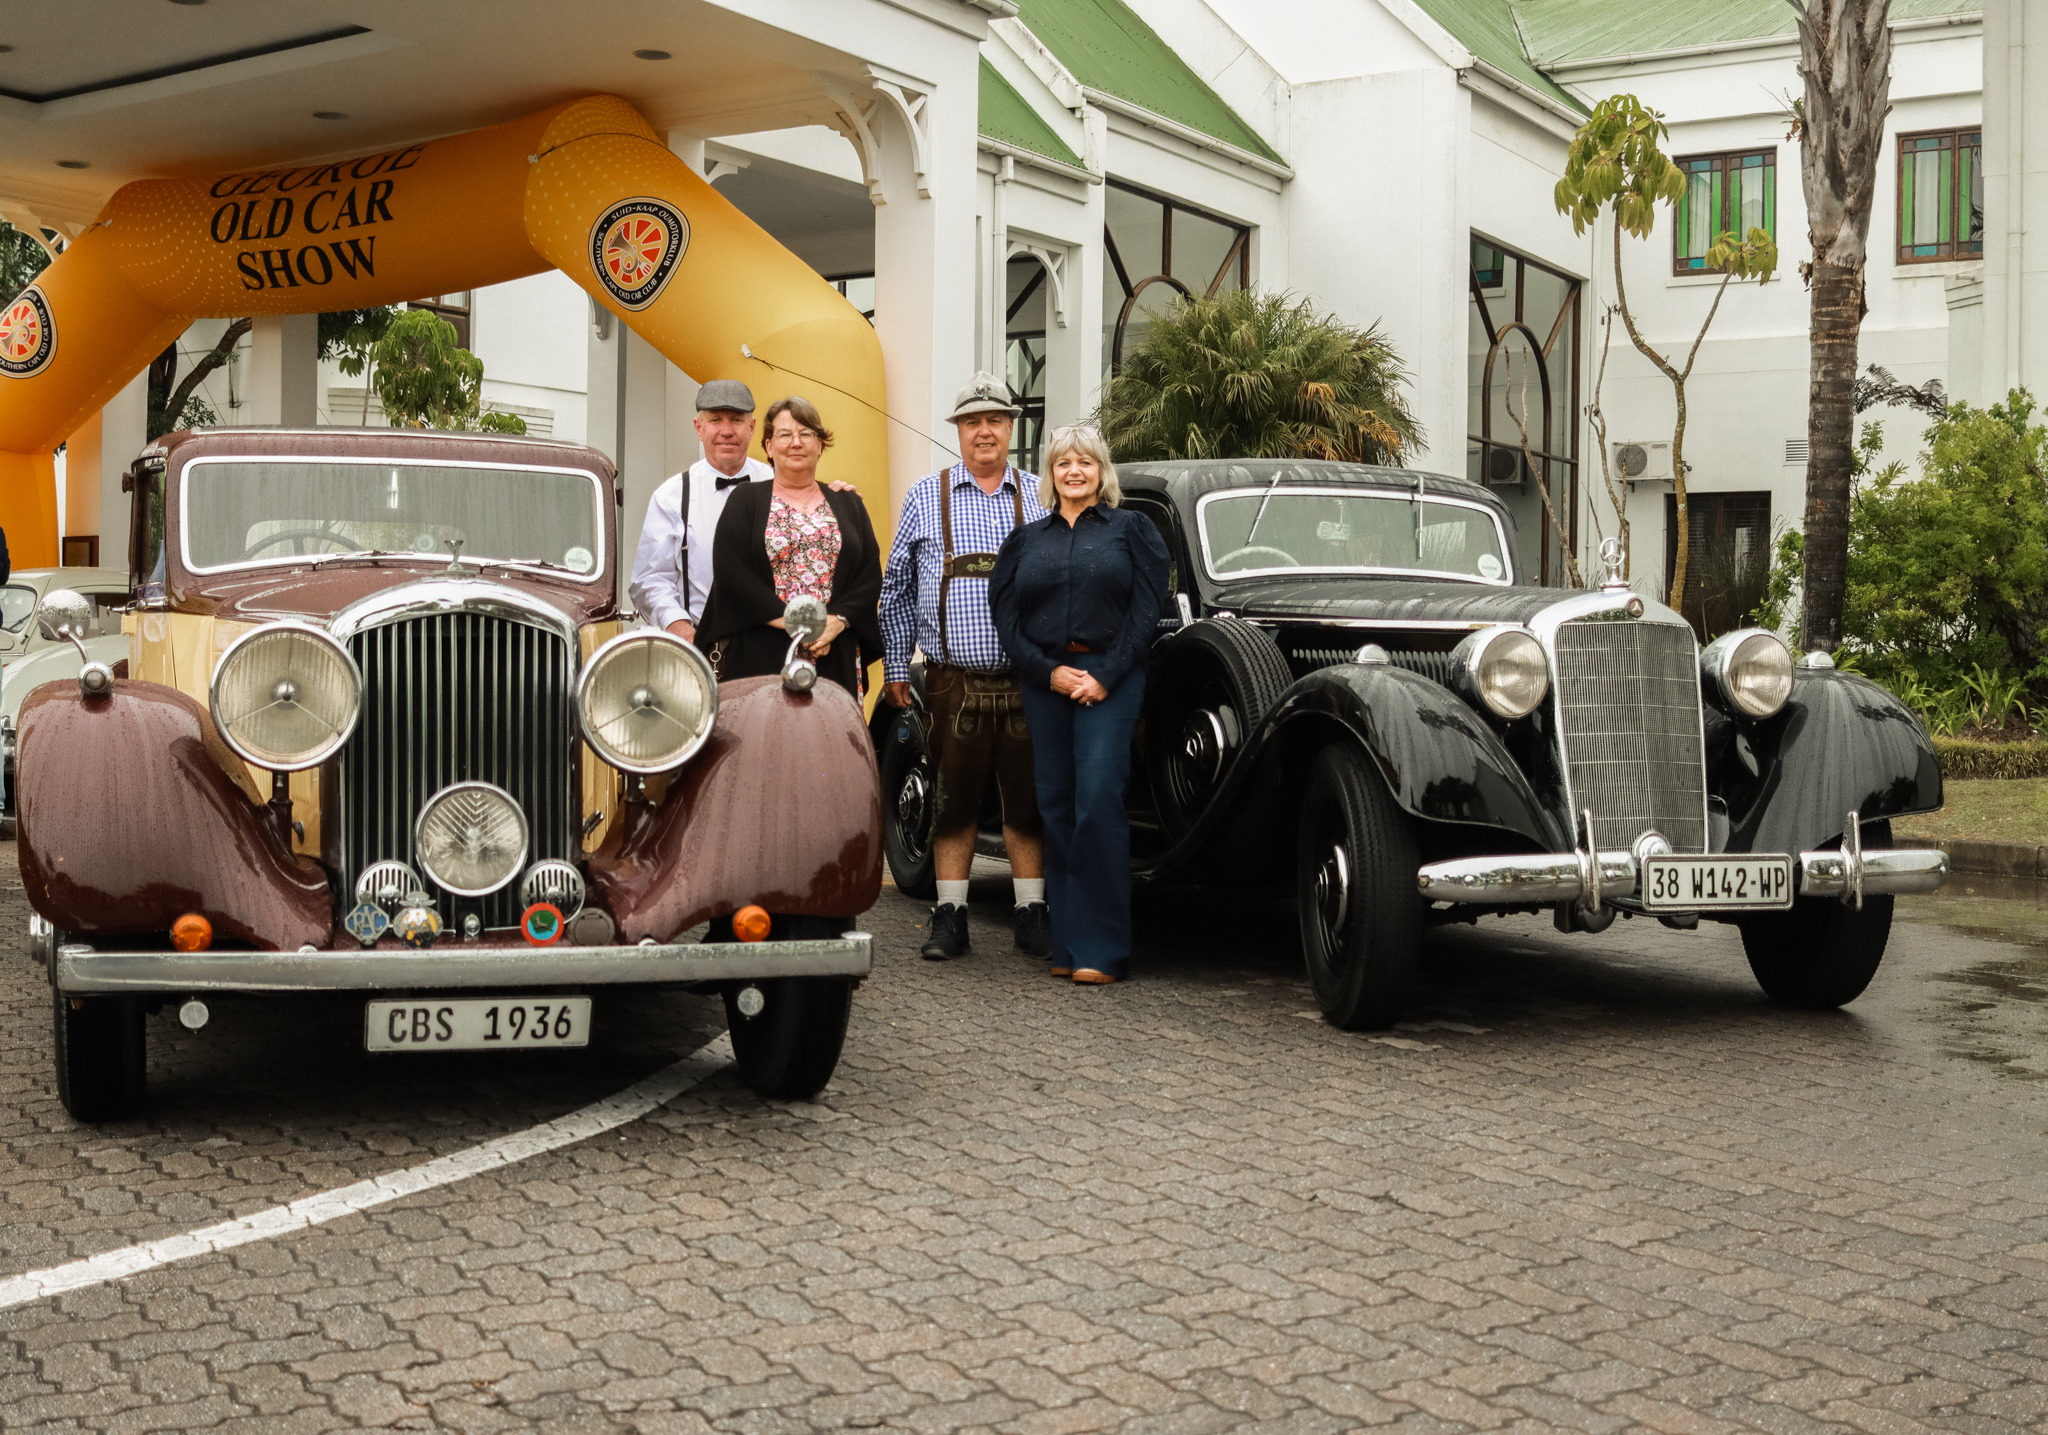 German-themed Old Car Show will oompah George into automotive action